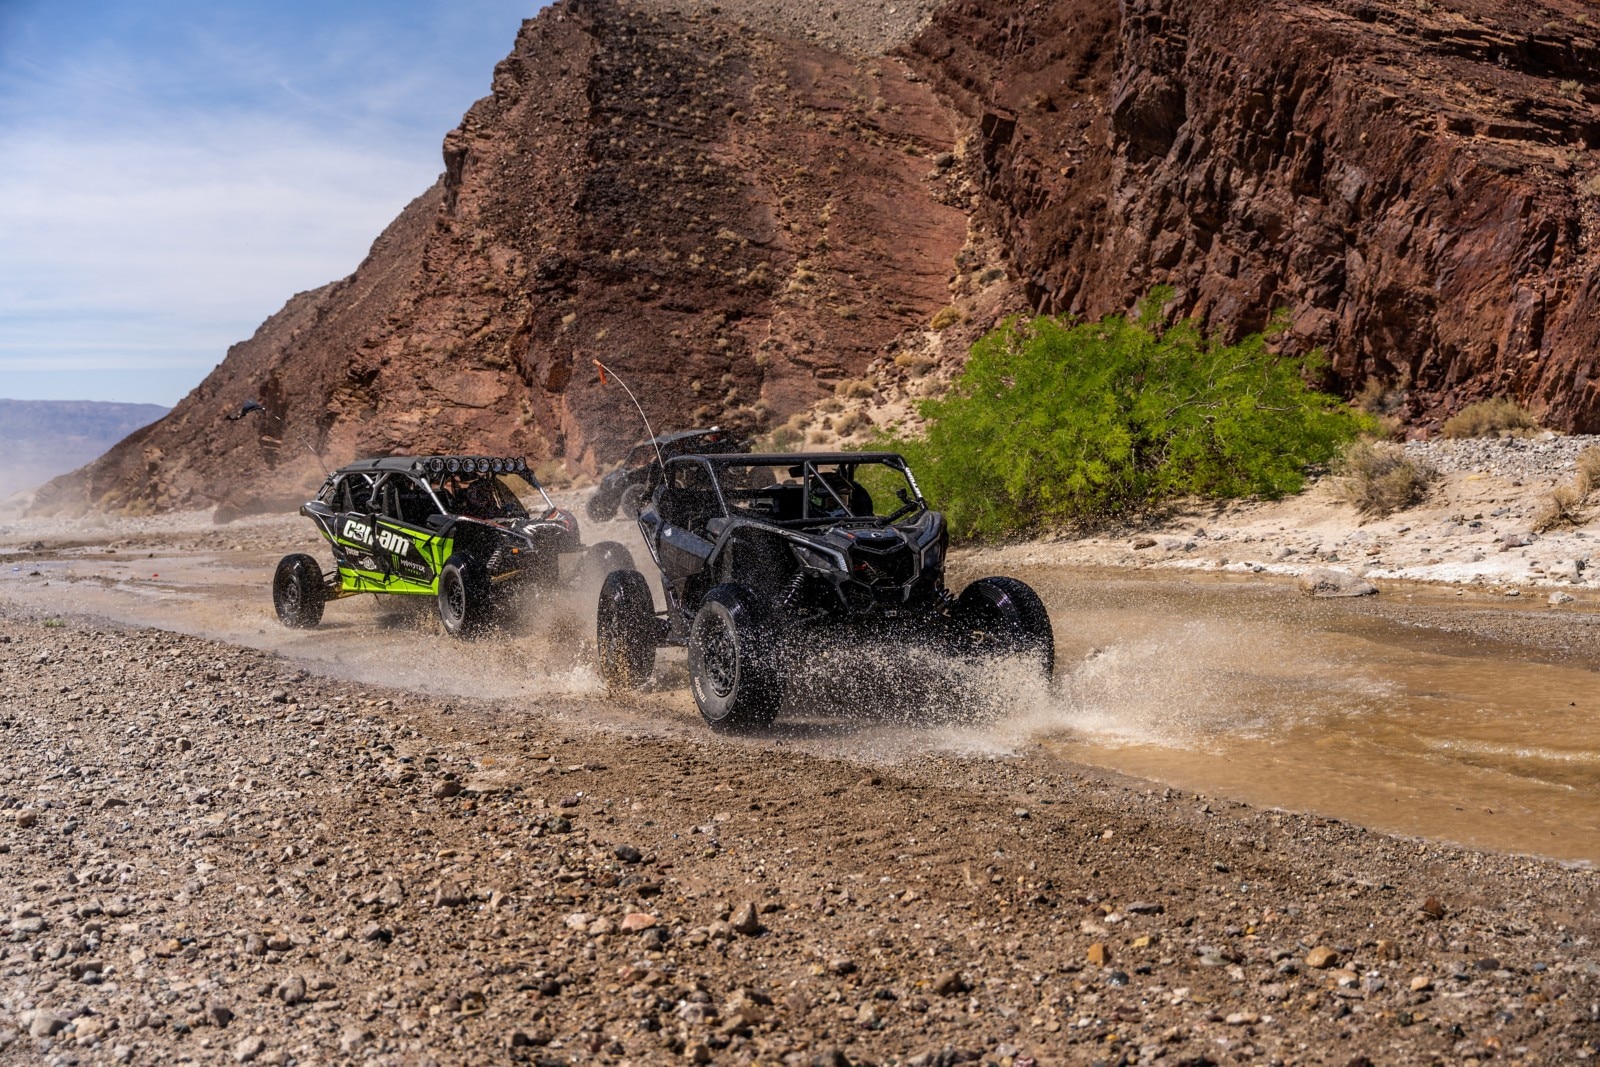 Two Can-Am SxS vehicles passing through water